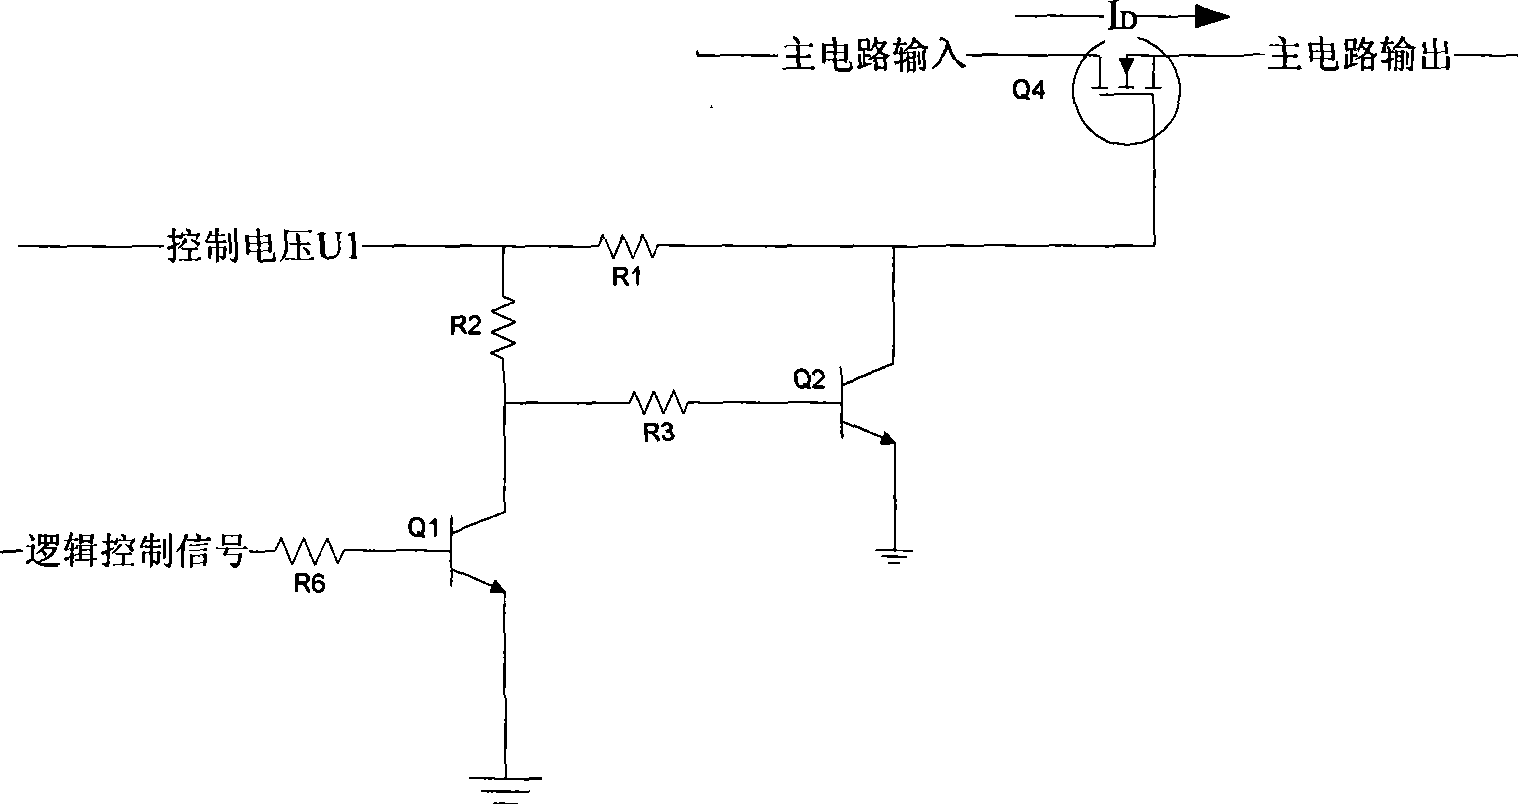 Switching circuit for power supply switch